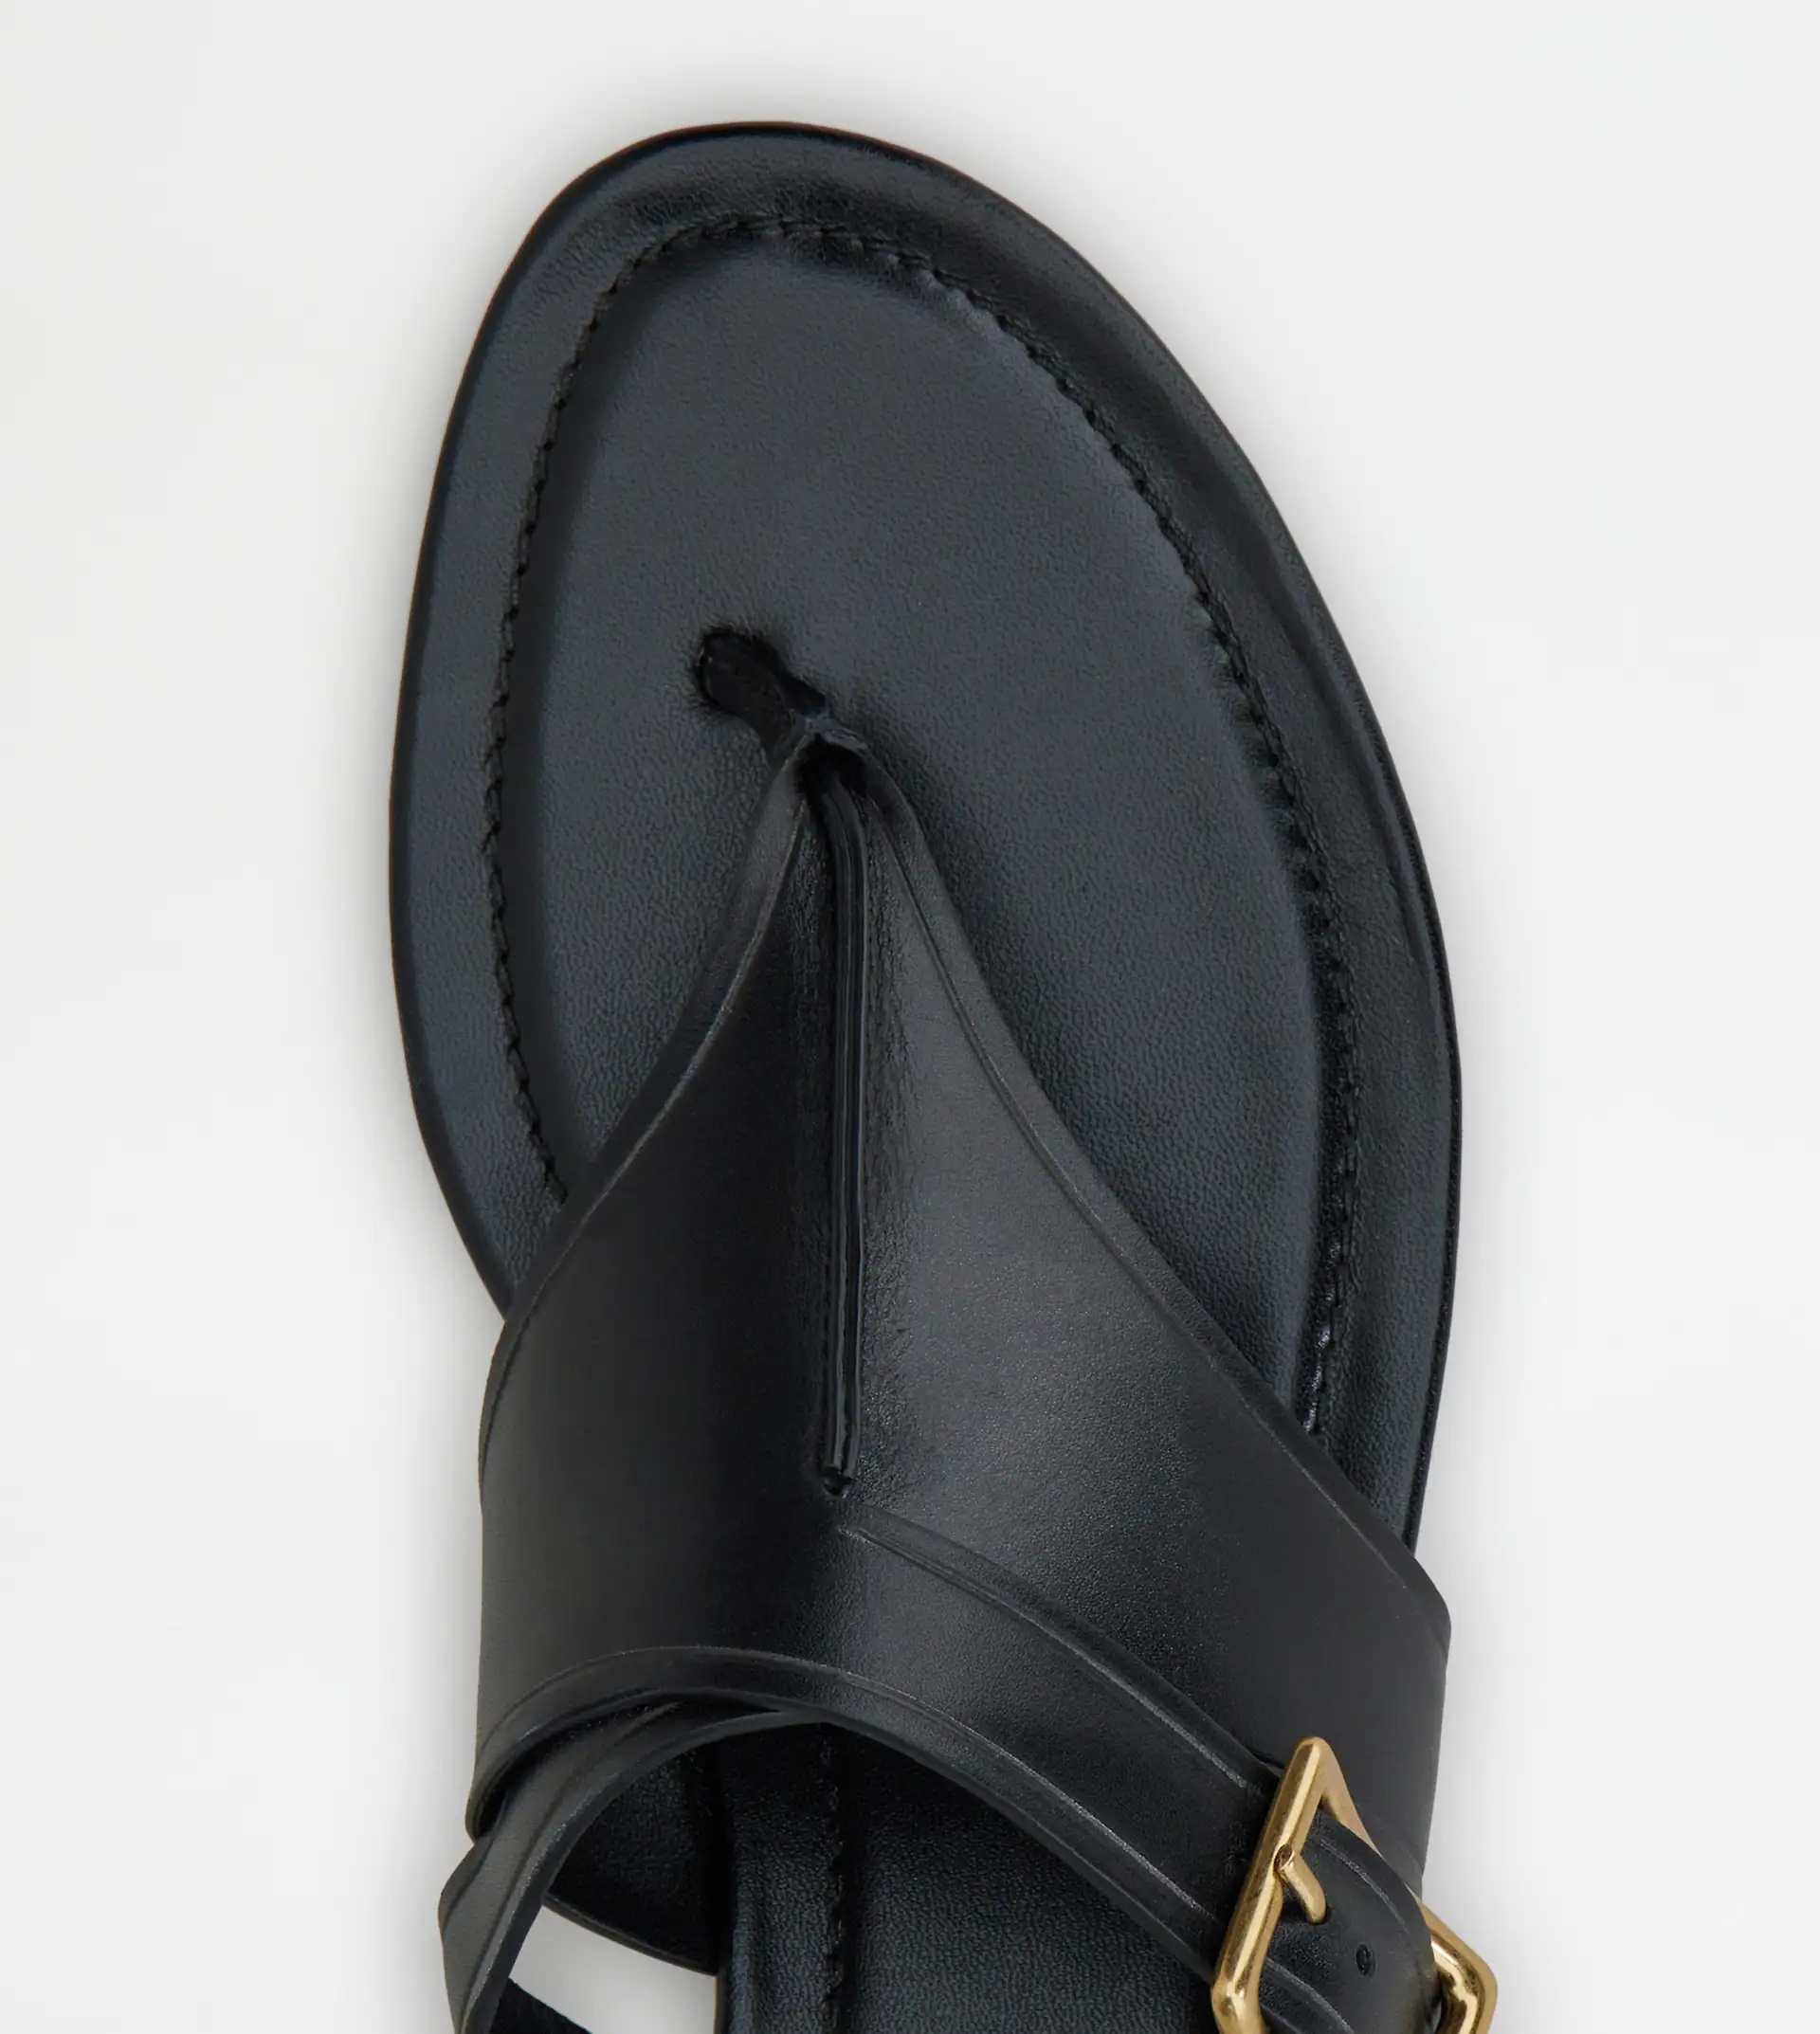 THONG SANDALS IN LEATHER - BLACK - 3